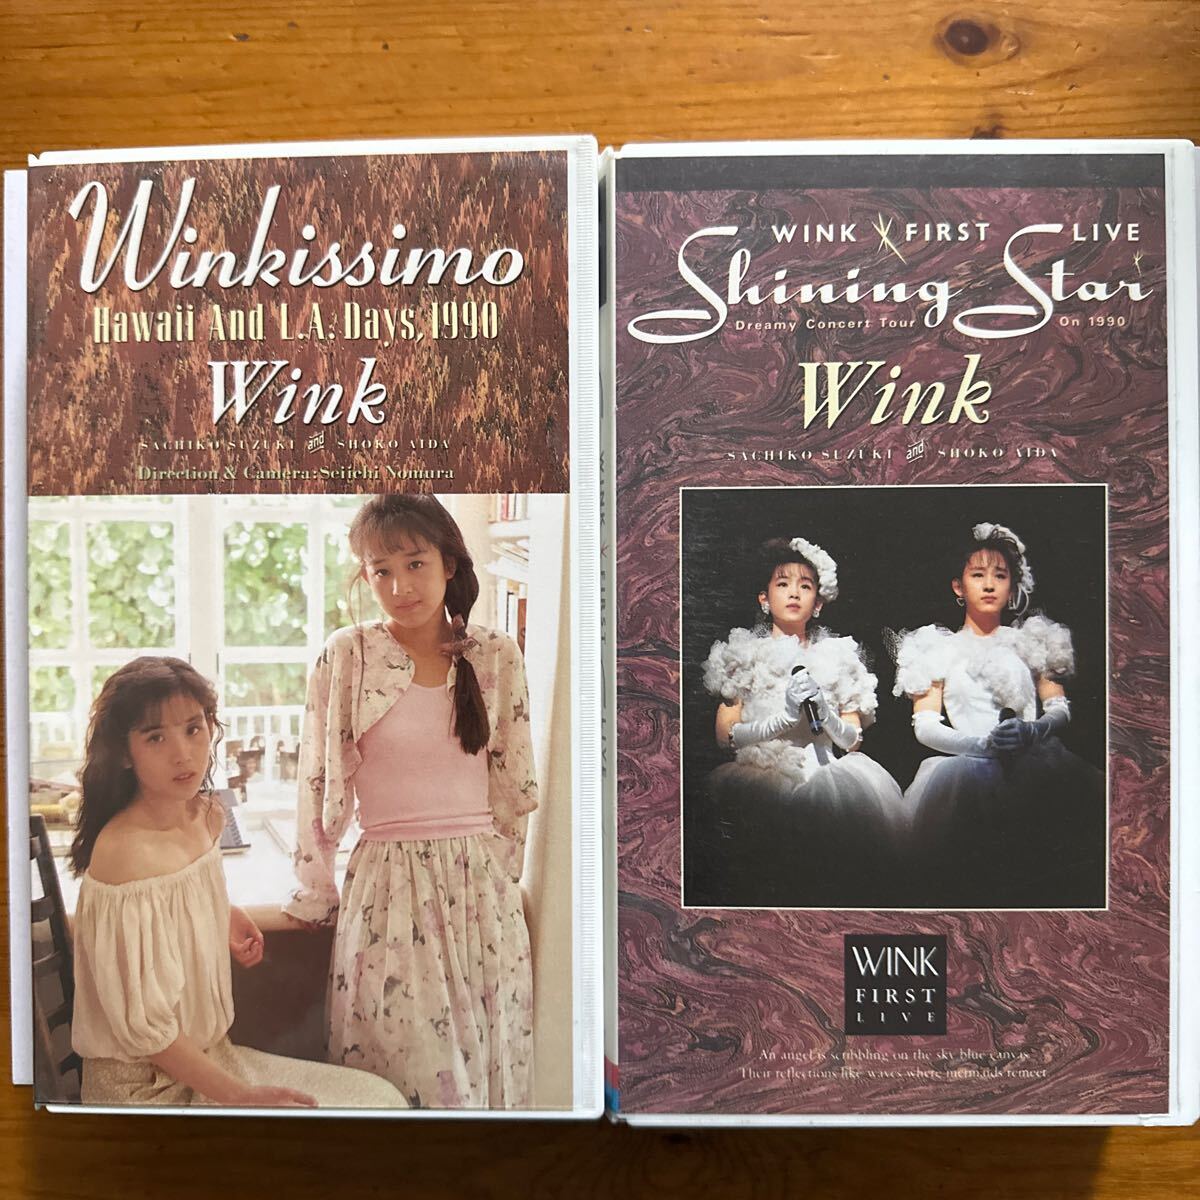 573 　ＶＨＳ　ウィンク　2本 Wink FIRST LIVE Shining Star　Winkissimo Hawaii And L.A. Days,1990　_画像1